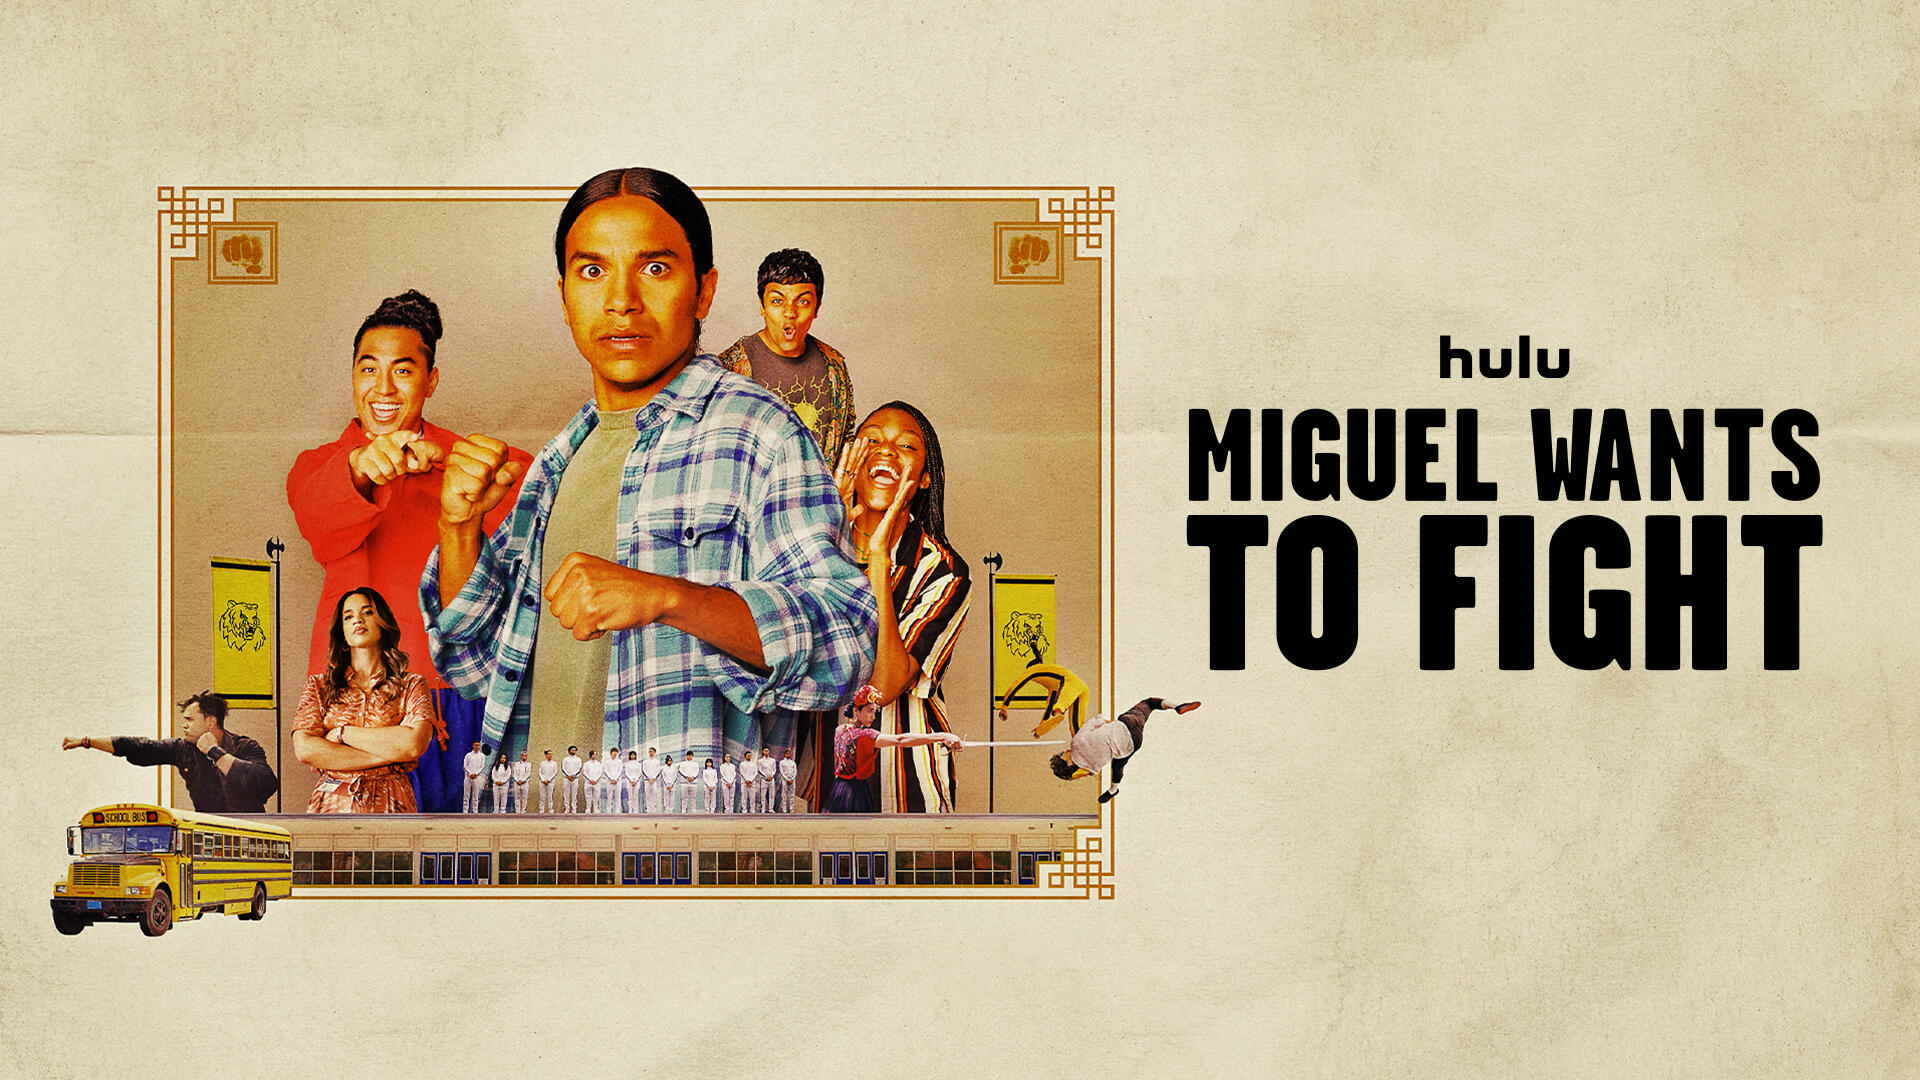 Miguel Wants to Fight -- Despite living in a neighborhood where fighting is stitched into the fabric of everyday life, high school junior Miguel (Tyler Dean Flores) has never found himself in one. And, to be honest, he’s perfectly fine with that. But when a combination of events turn his life upside down, Miguel and his three best friends —the stoic David (Christian Vunipola), the rowdy Cass (Imani Lewis) and the quick-tonged Srini (Suraj Partha)— enter into a series of hilarious misadventures as he tries to get into his first ever fight. Miguel (Tyler Dean Flores), David (Christian Vunipola), Cass (Imani Lewis) and Srini (Suraj Partha), shown. (Courtesy of Hulu)